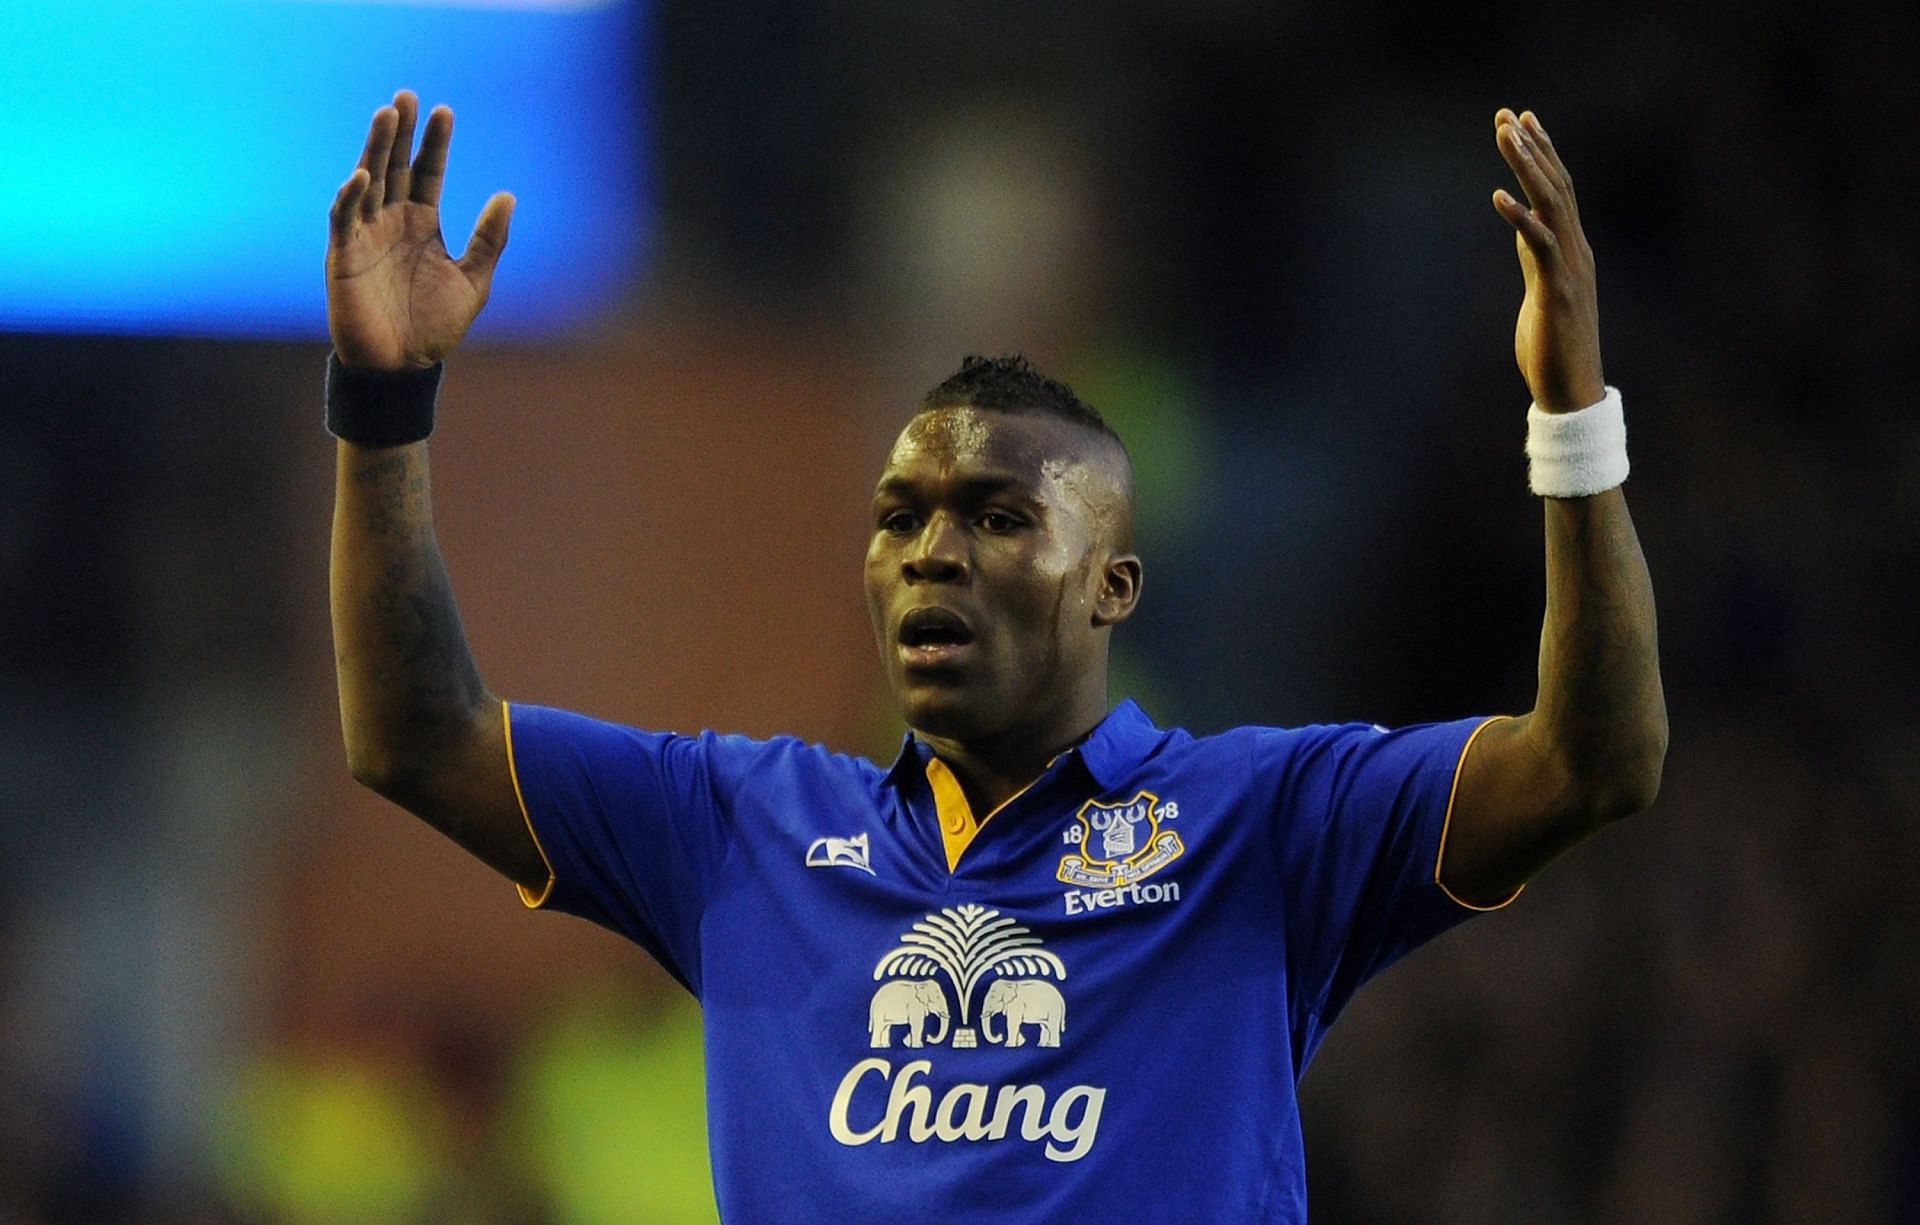 Drenthe had a calamitous fall from grace